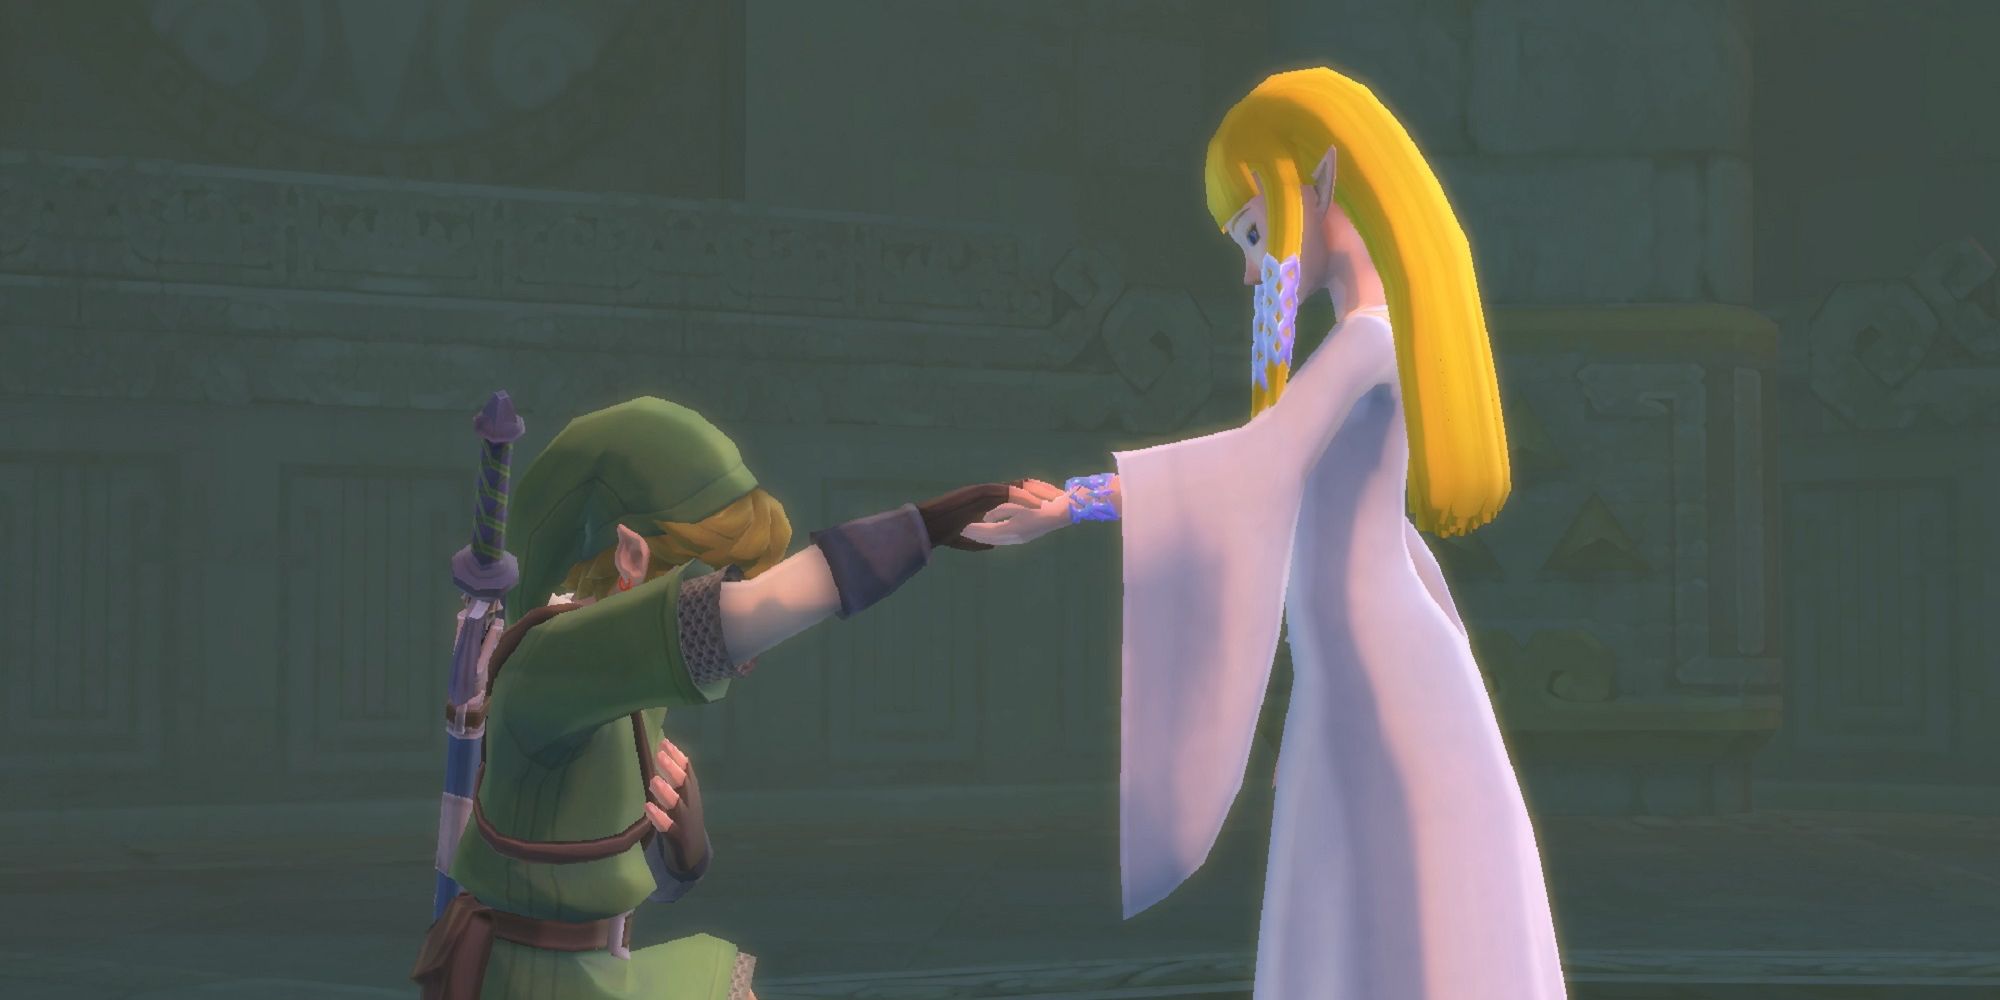 A sequel to Skyward Sword could potentially be more fascinating than Breath of the Wild 2